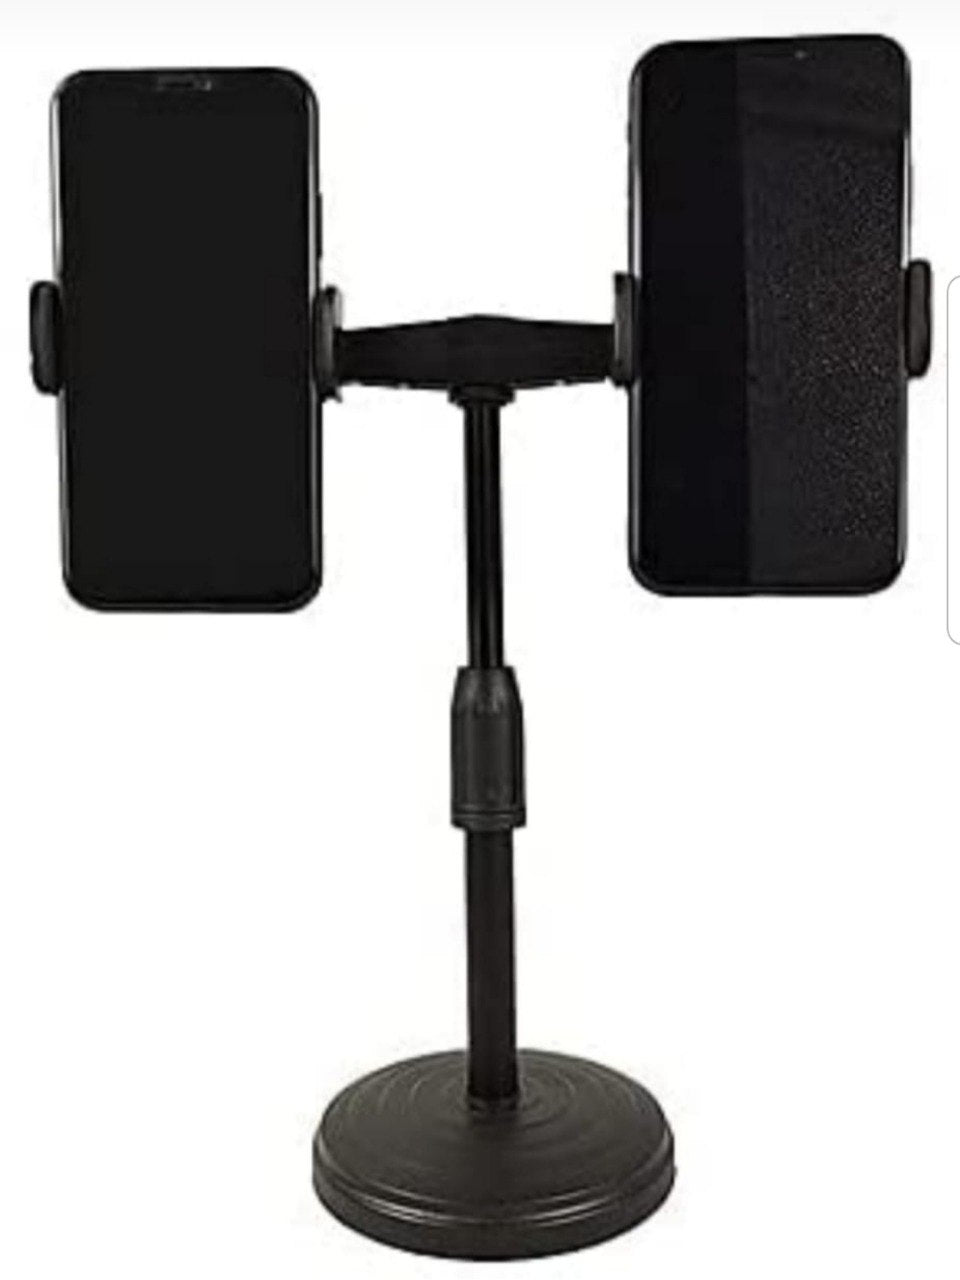 Live Dual Clip Broadcast & Microphone Stand - 2 Mobile Holder - Best Multipurpose Utility